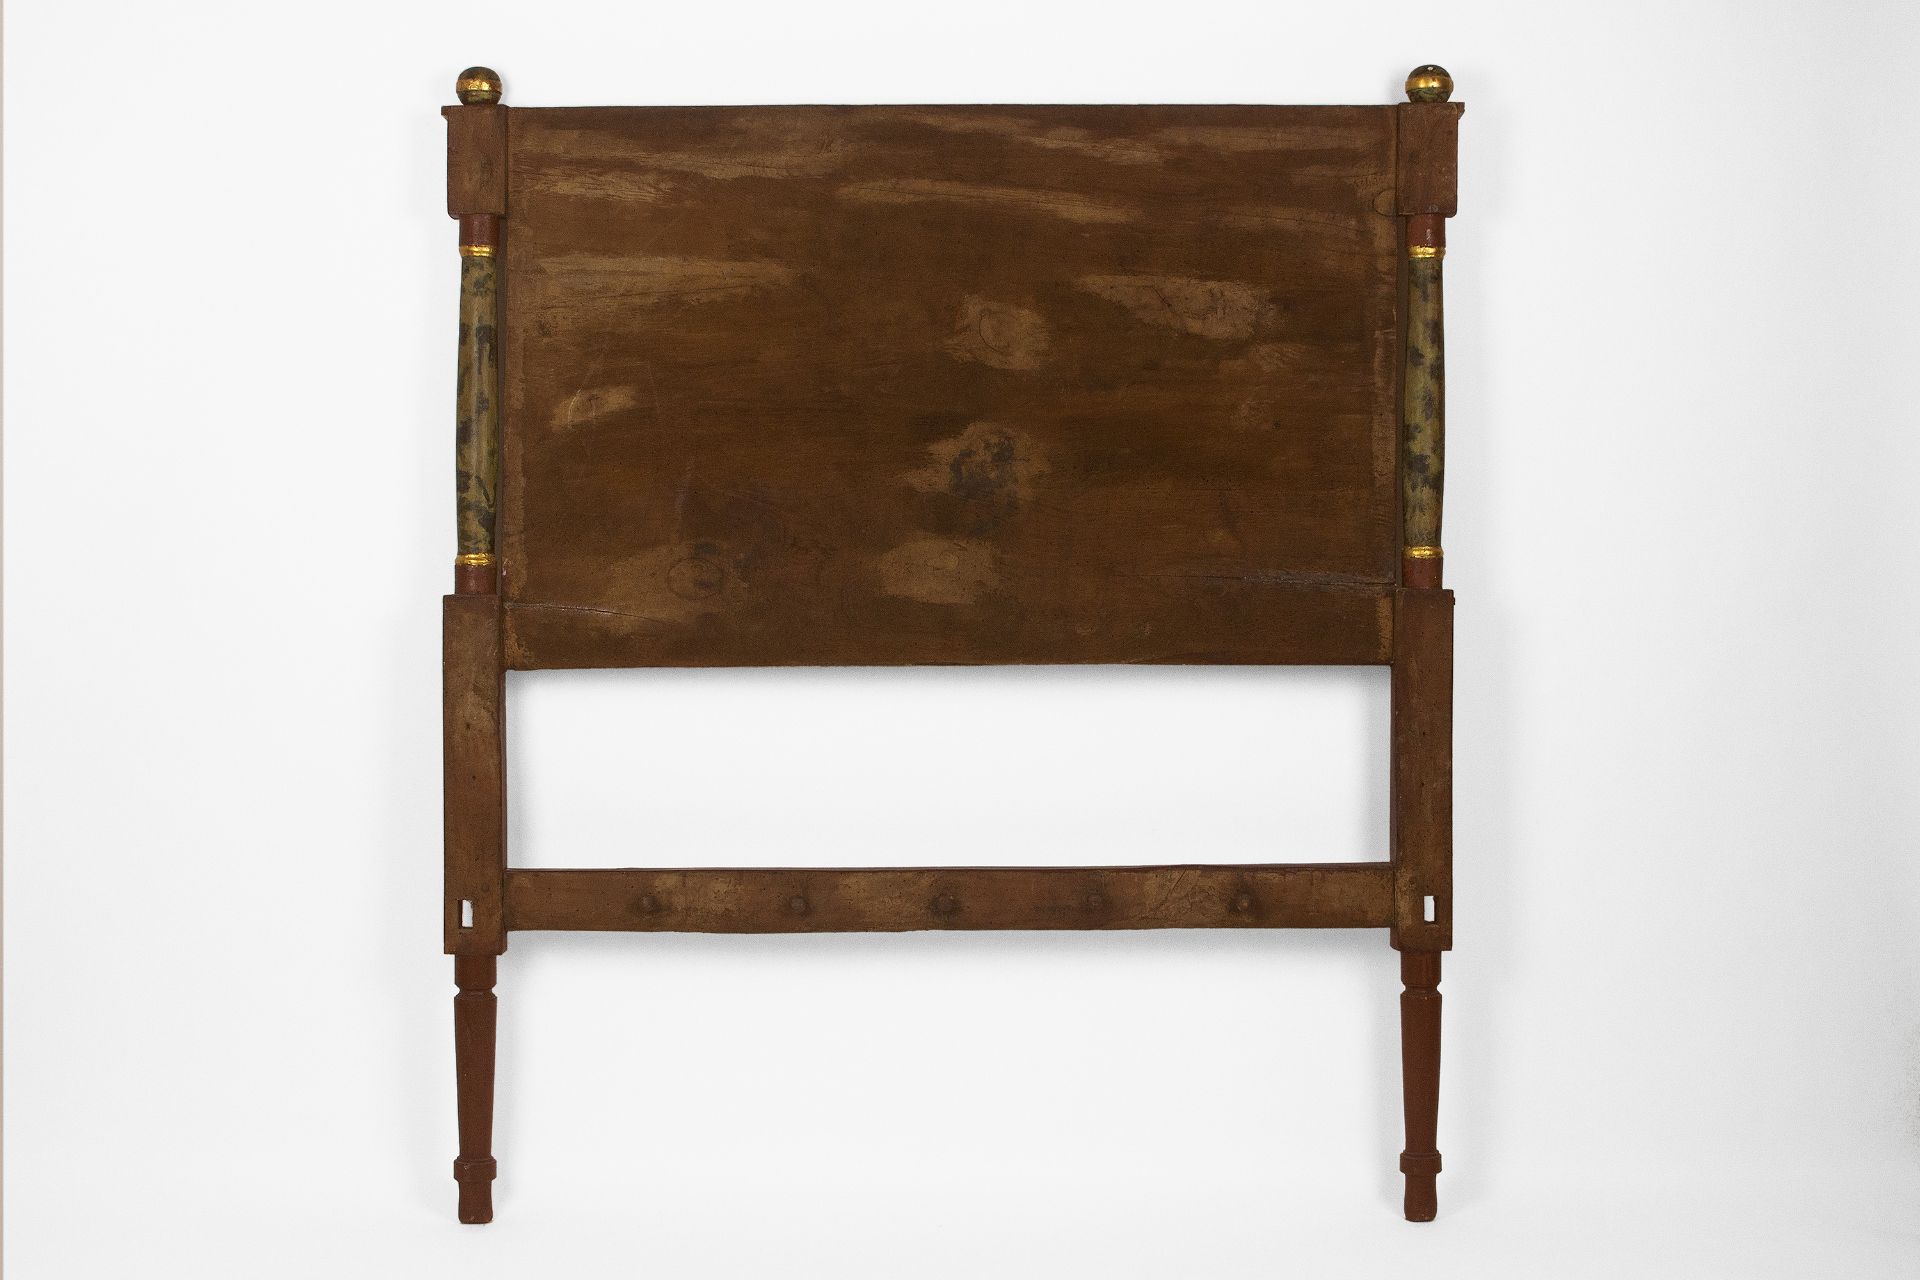 A late 18th century Charles IV period polichromed bed headboard - Image 2 of 3